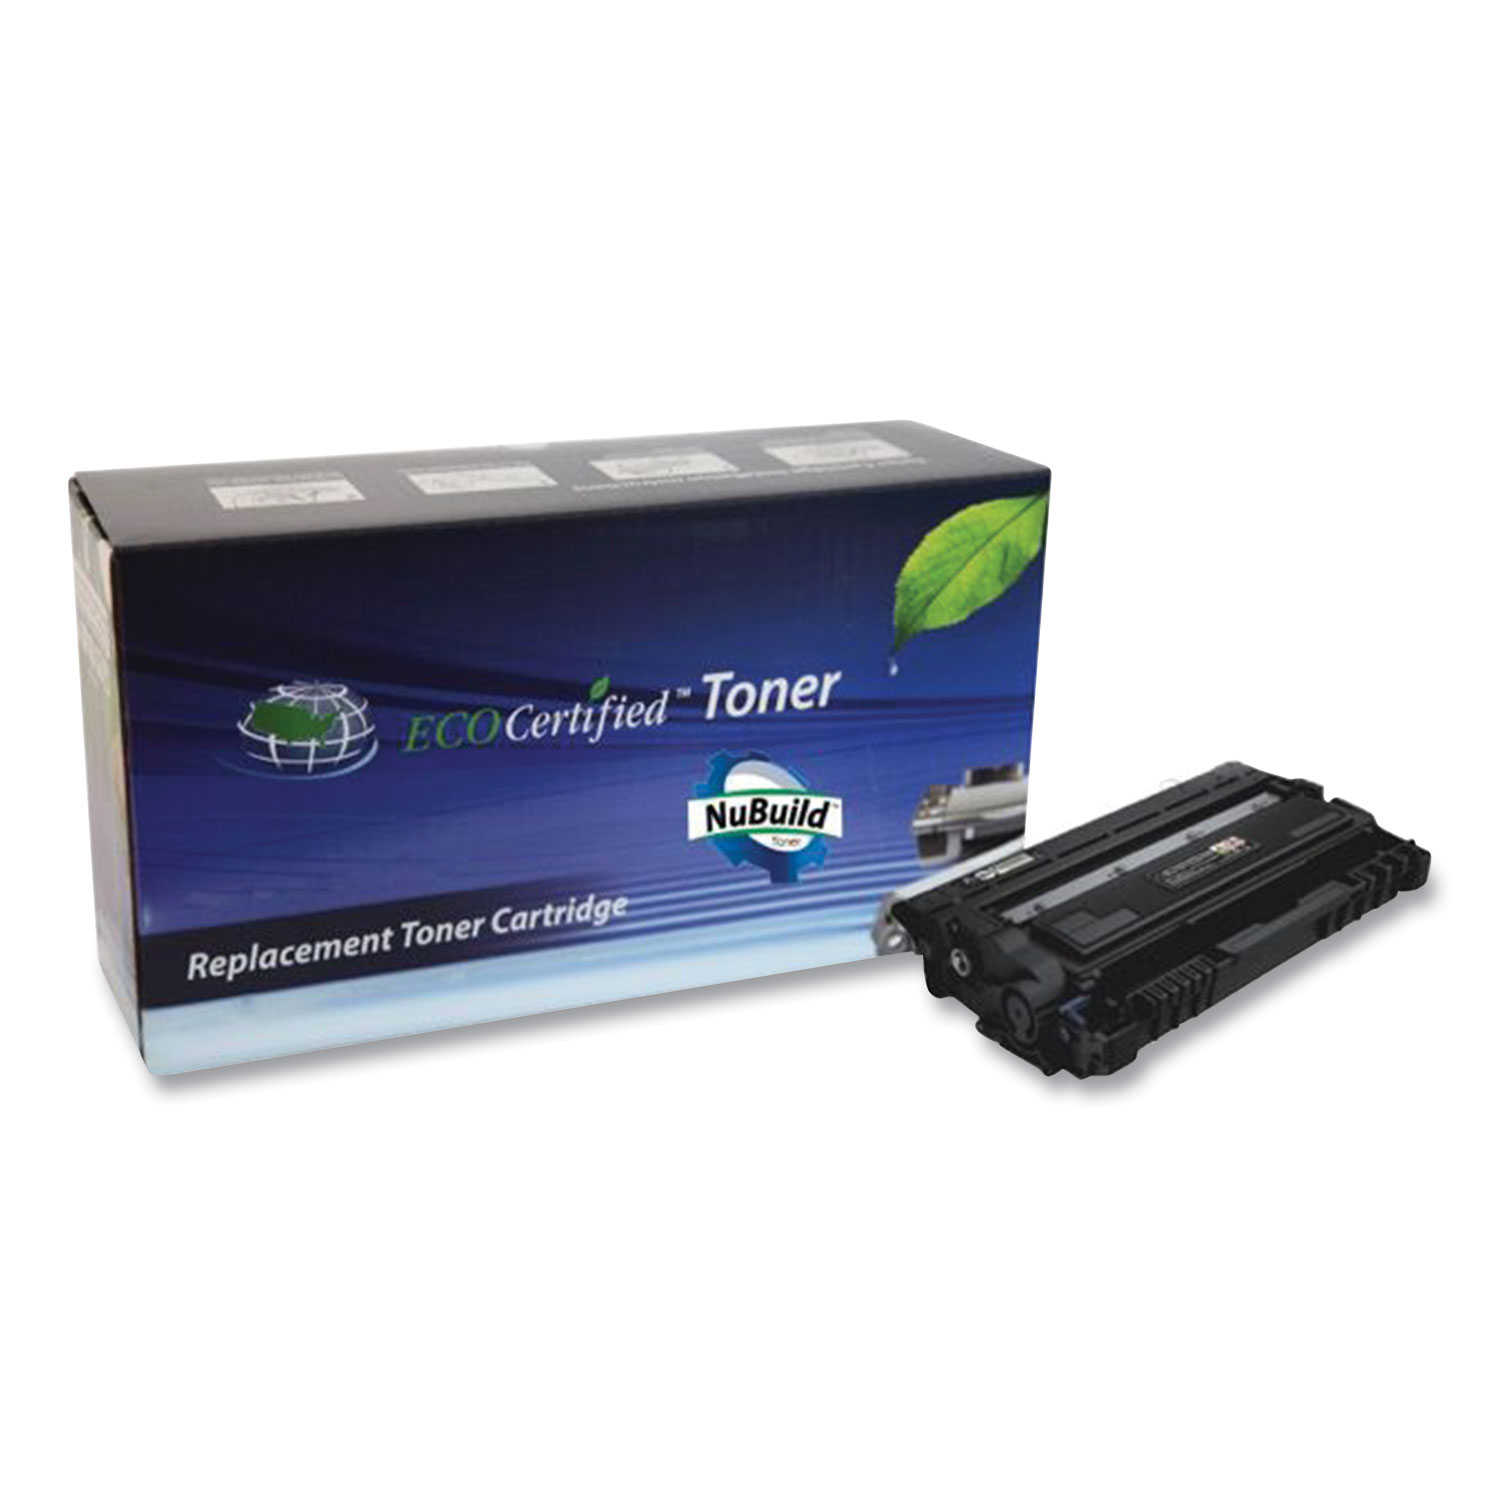 ECO Certified™ Compatible E310 Toner, 2,600 Page-Yield, Black